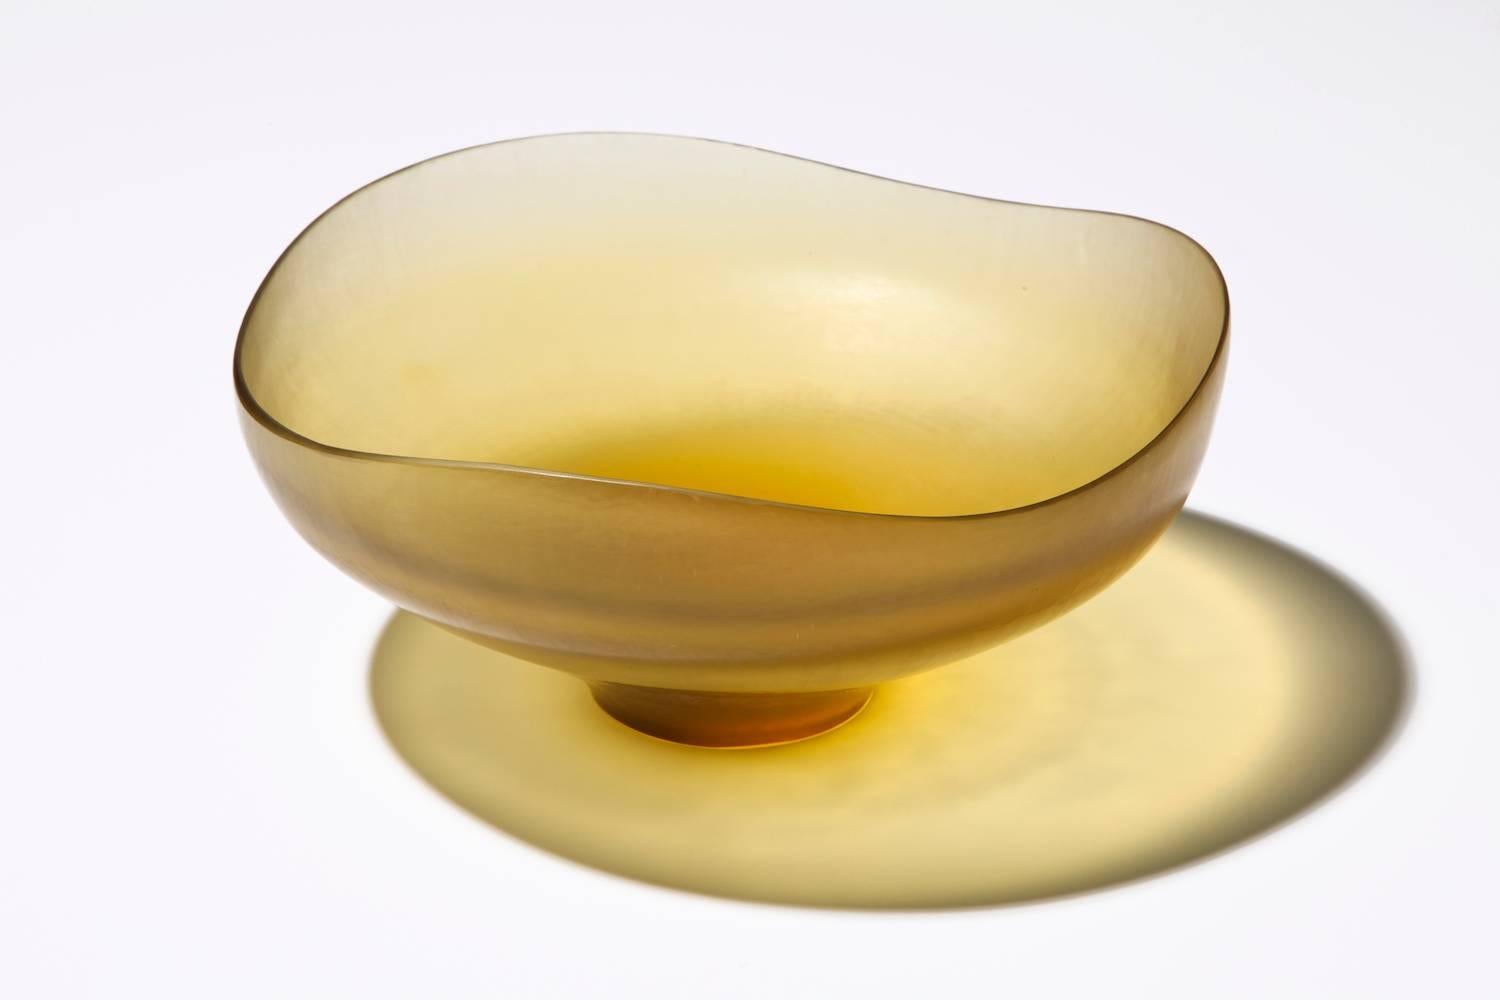  Battuto Bowl by Tobia Scarpa for Venini. Model #8505 footed bowl of wheel-carved amber colored glass. A great example of hand worked Murano glass. This piece was purchased directly from Venini, Murano, circa 1978.
Etched signature on underside.